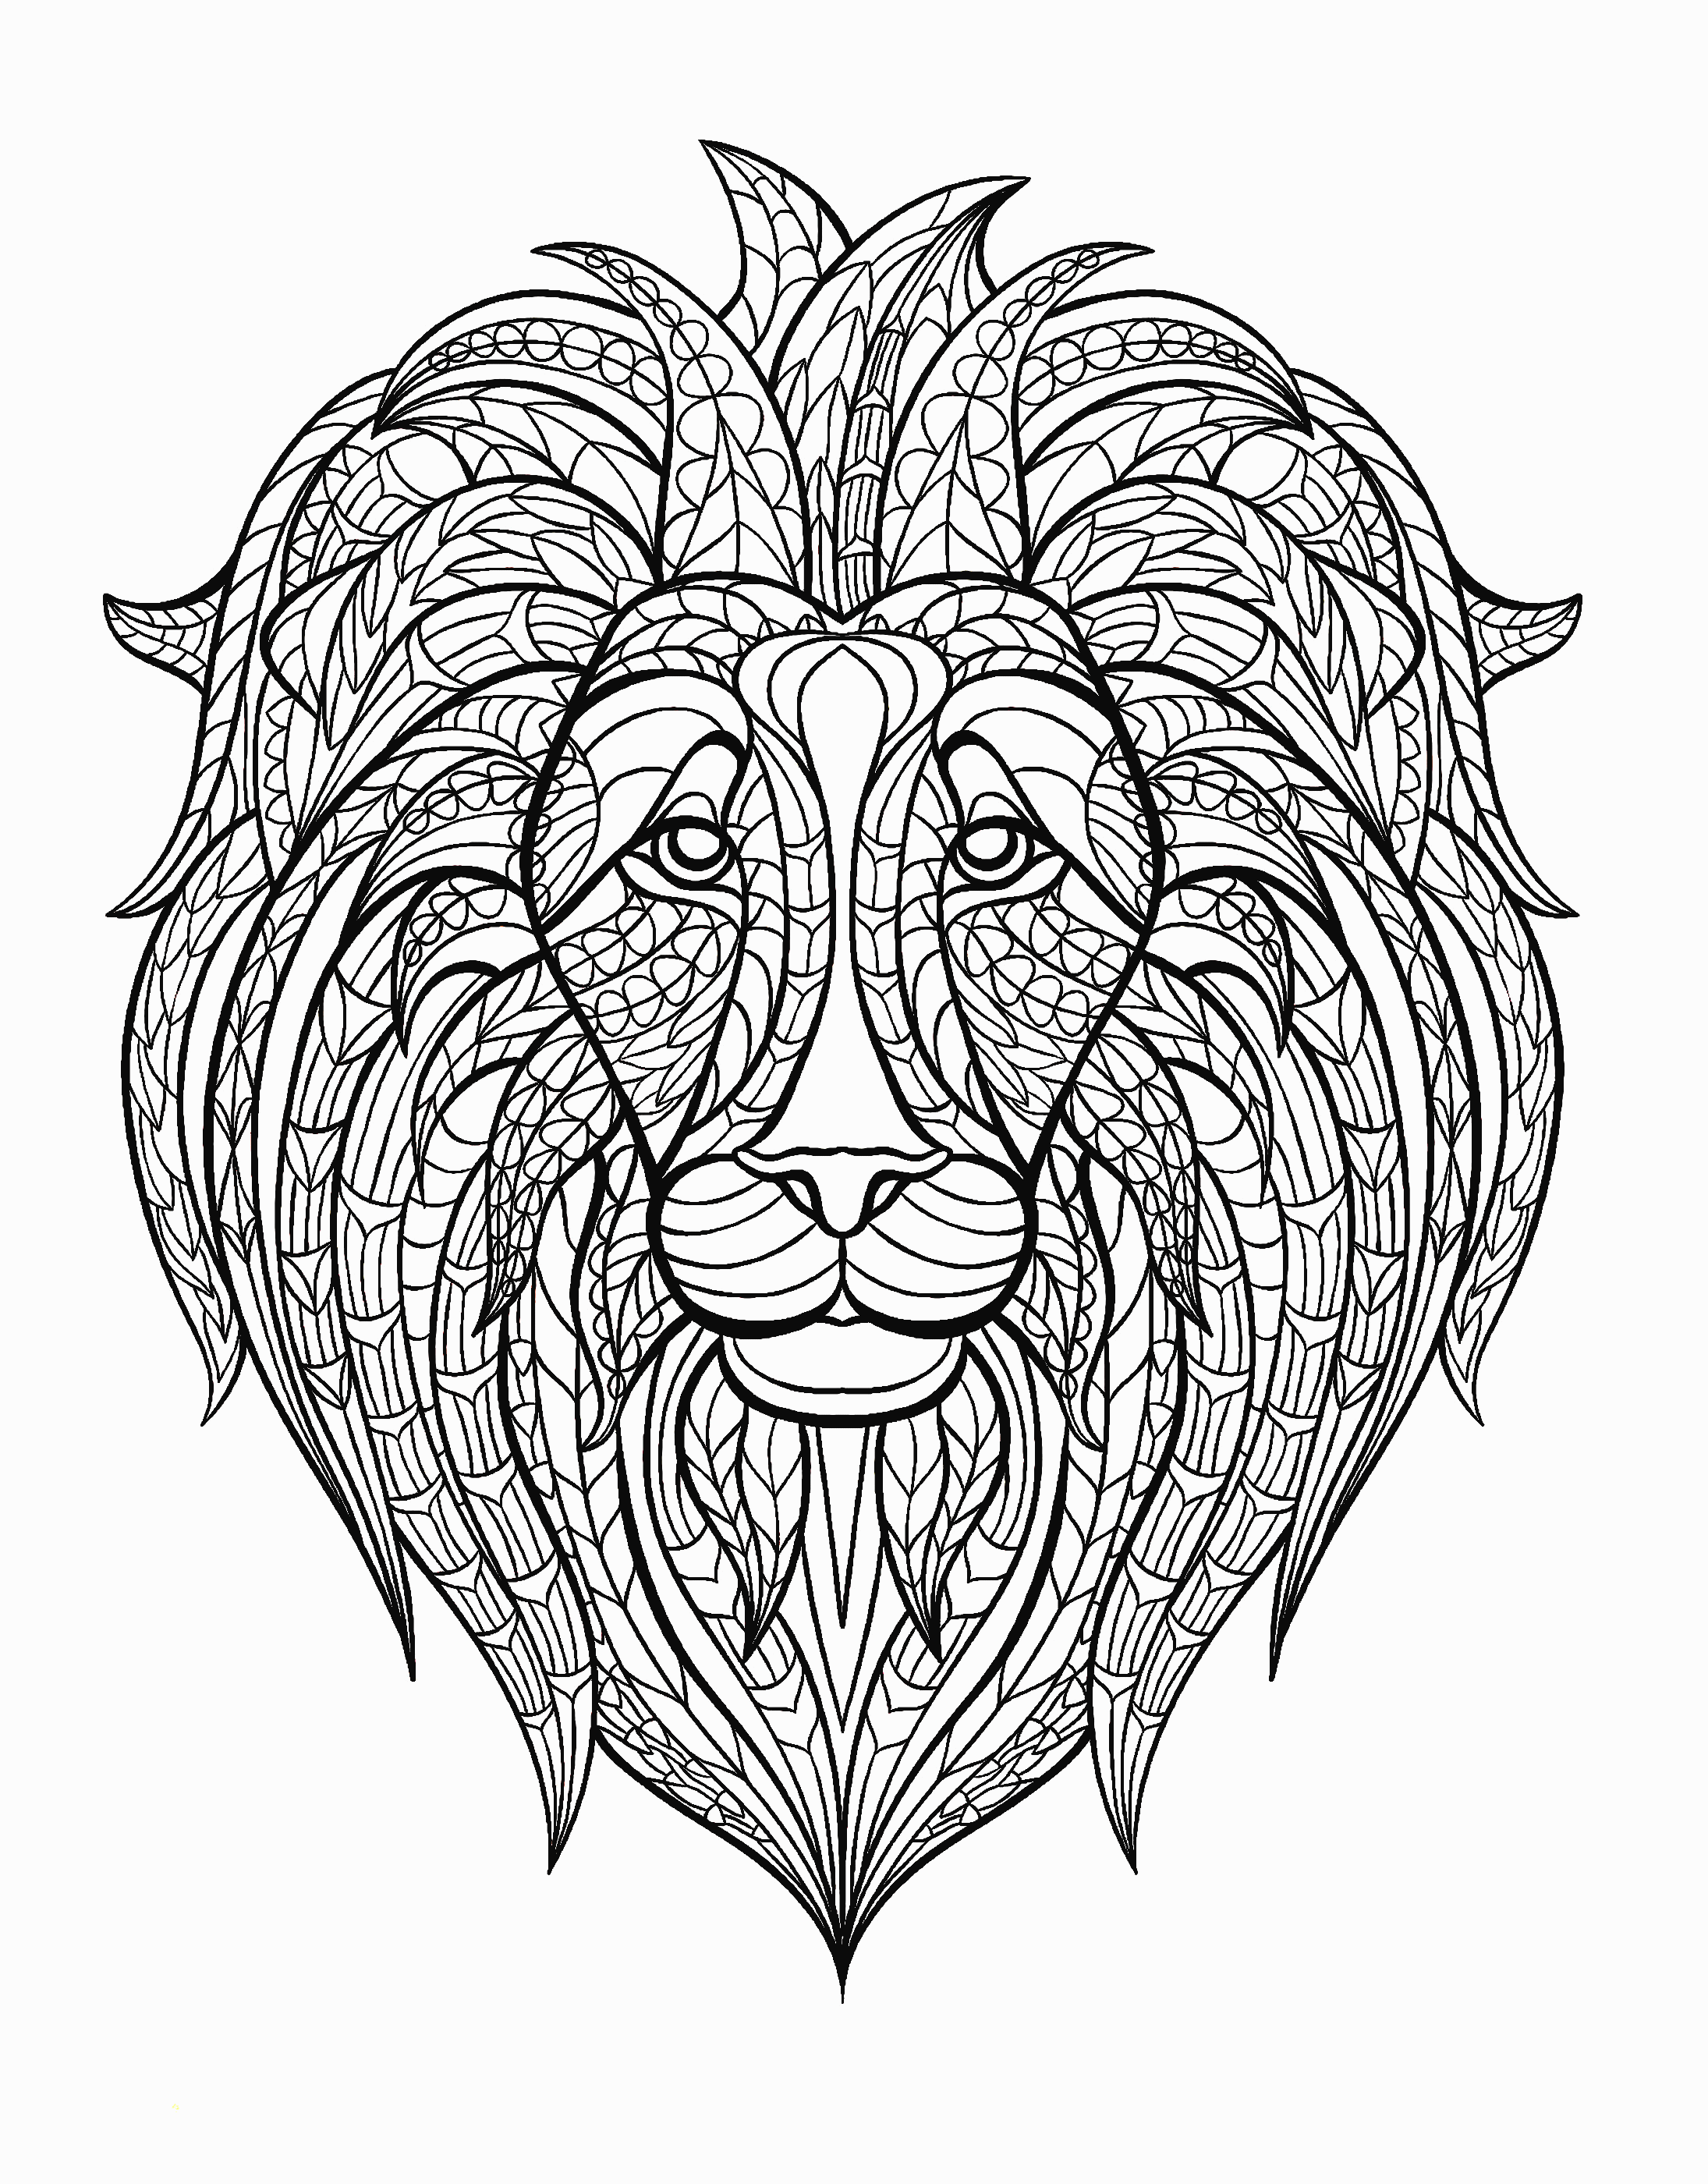 Abstract Lion Coloring Pages   Coloring Pages For All Ages ...